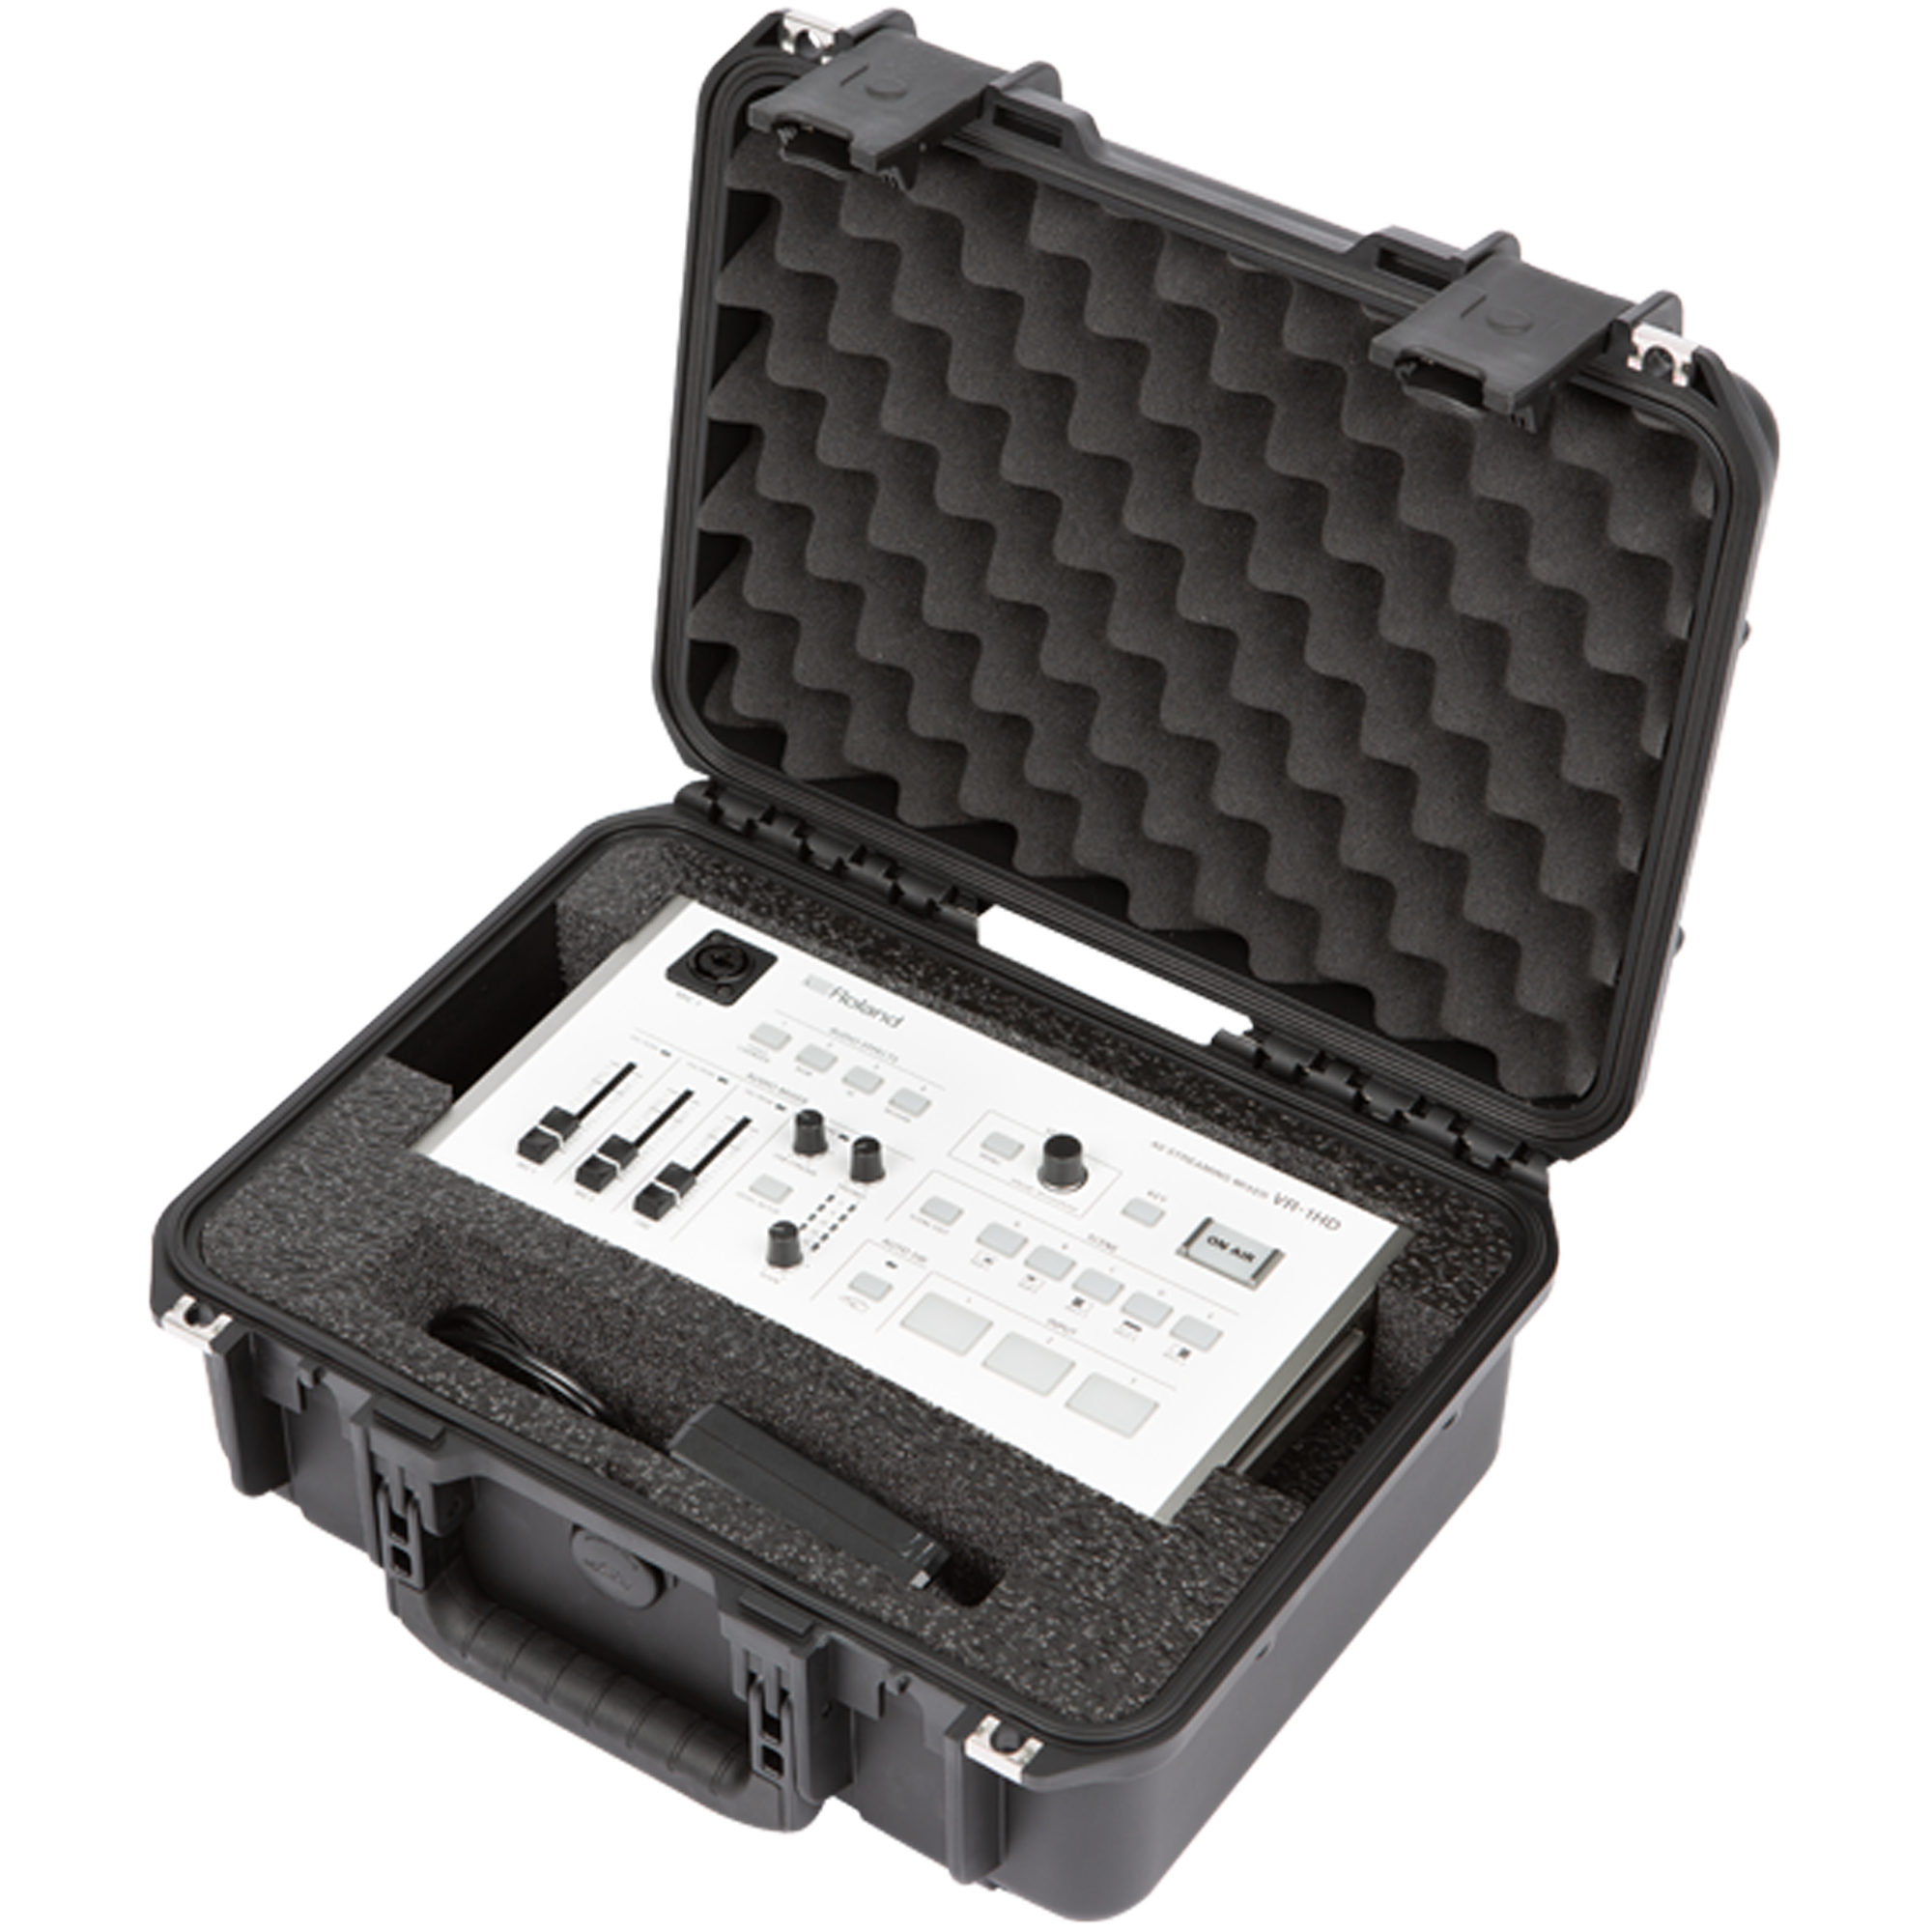 BYFP ipCase for Roland VR-1HD